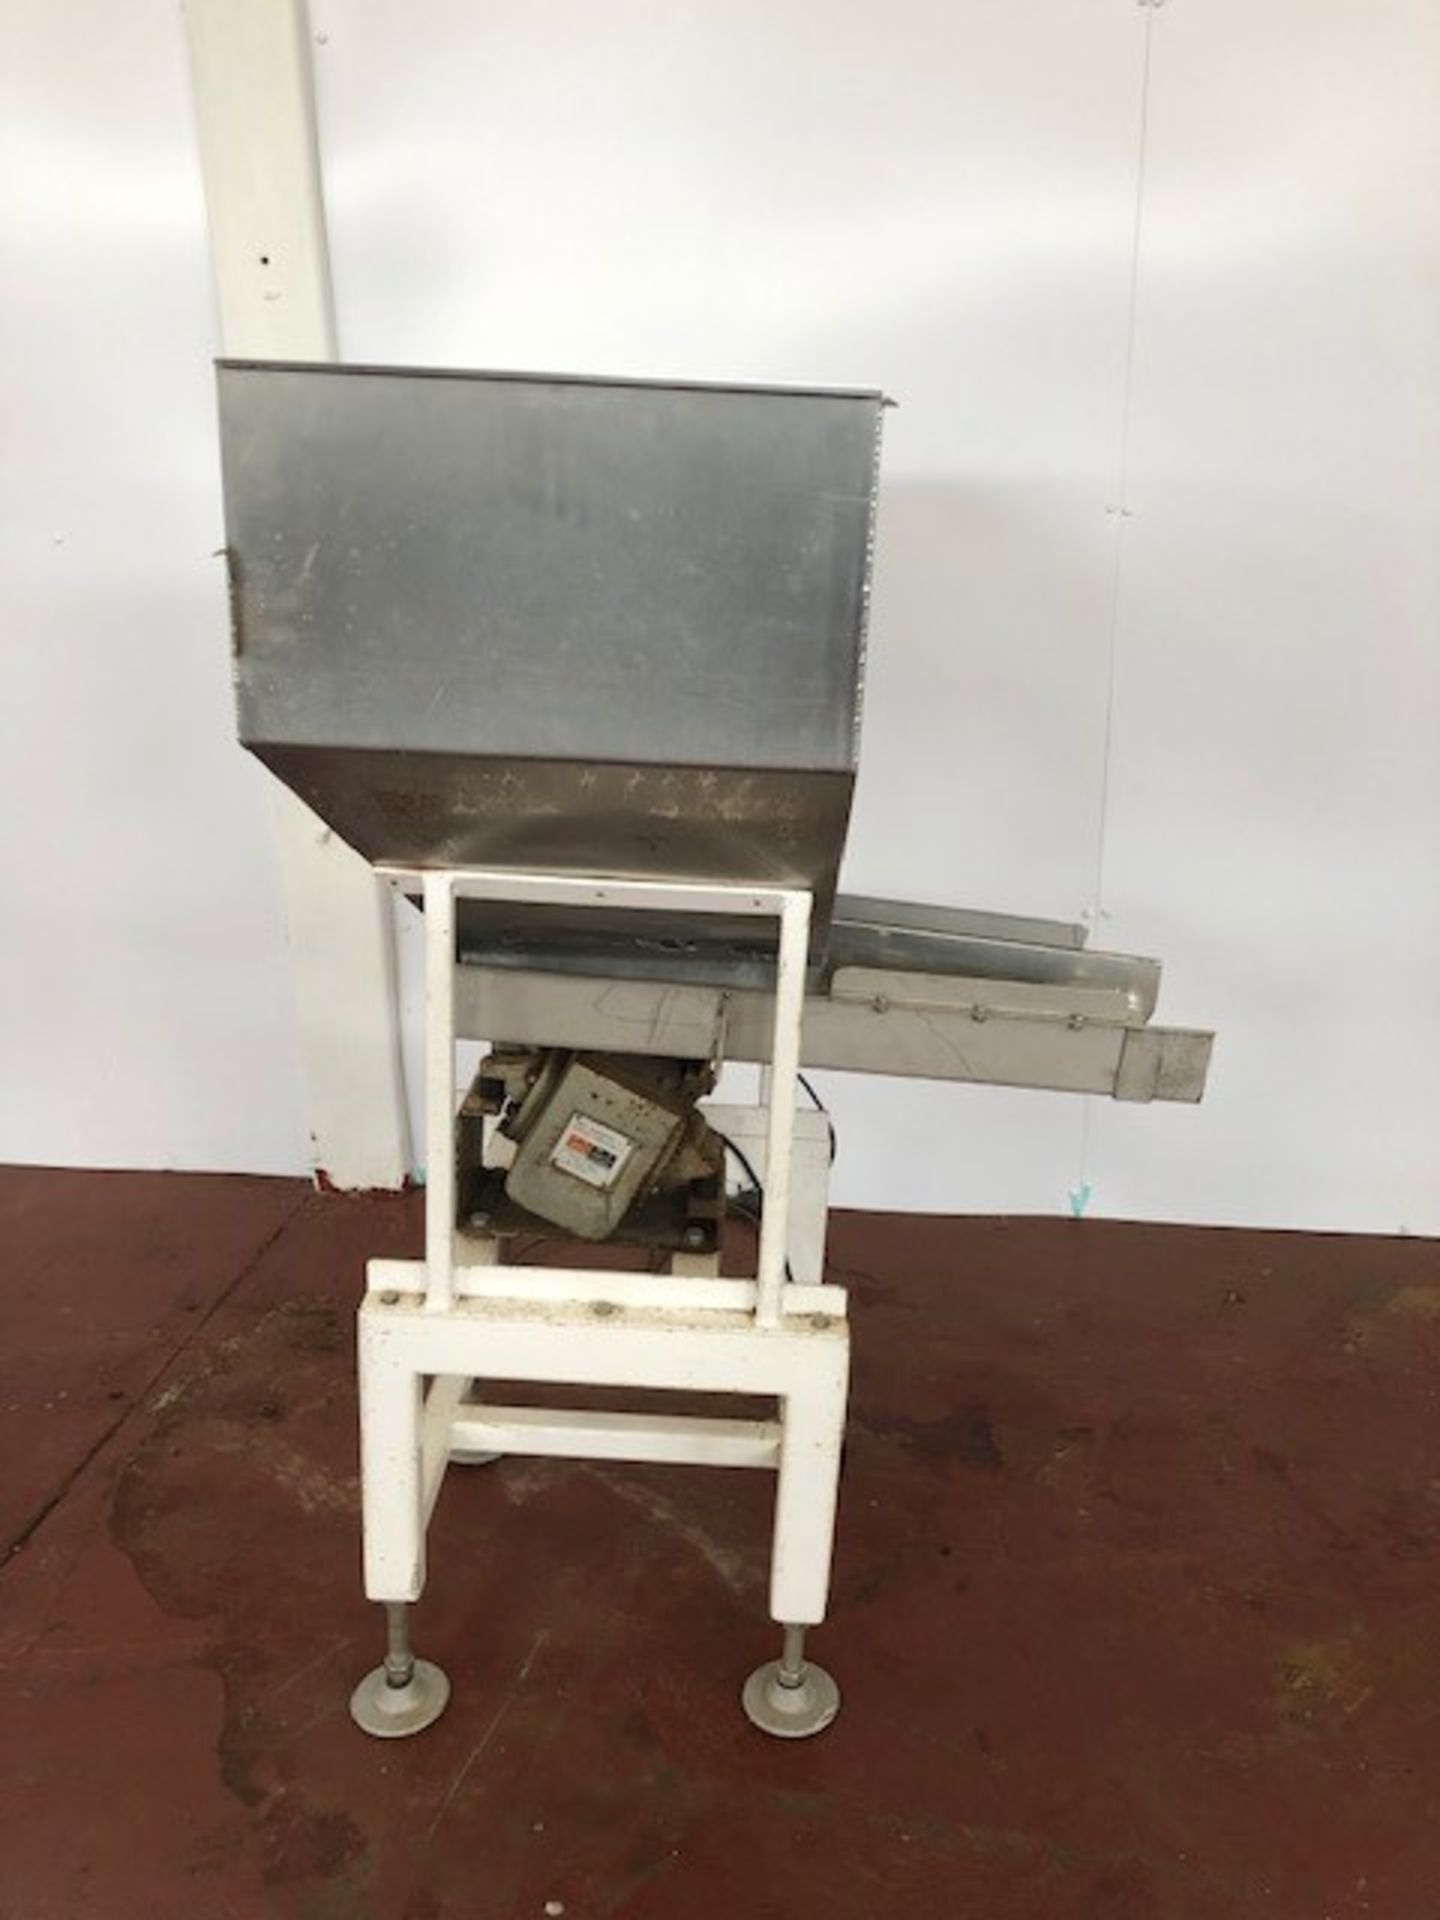 stainless steel vibratory feeder - Image 2 of 4